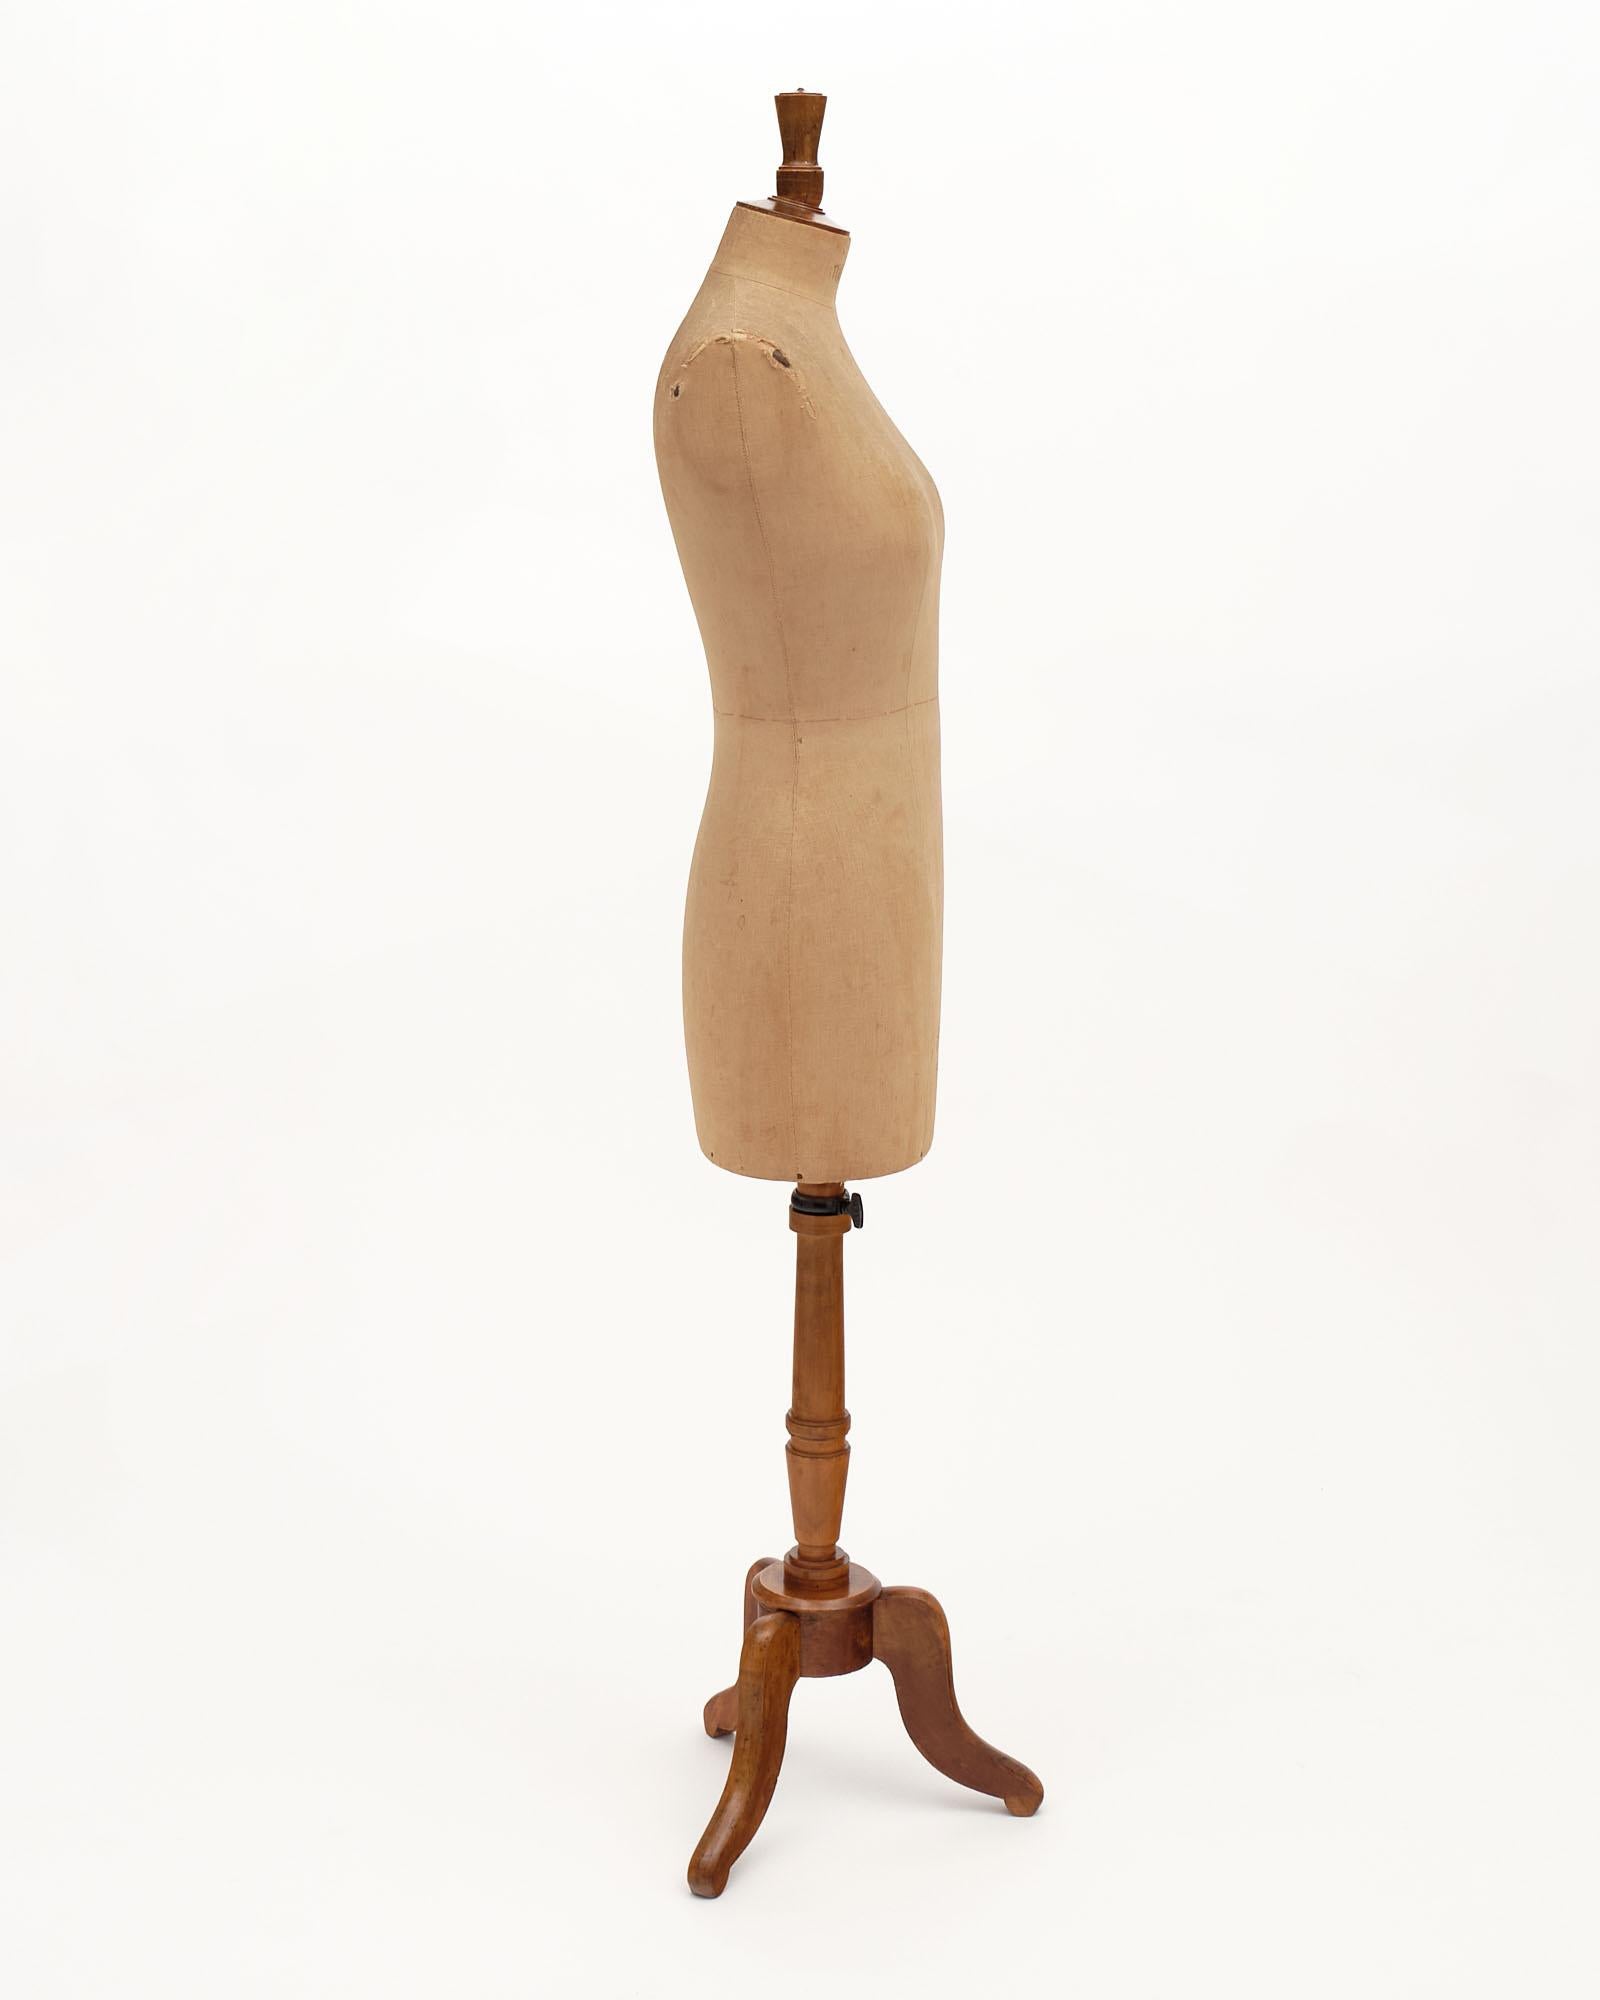 French Antique Couture Dress Mannequin from the iconic 19th century Parisian firm Stockman. This mannequin is made of canvas on wood with a solid walnut tripod adjustable base.